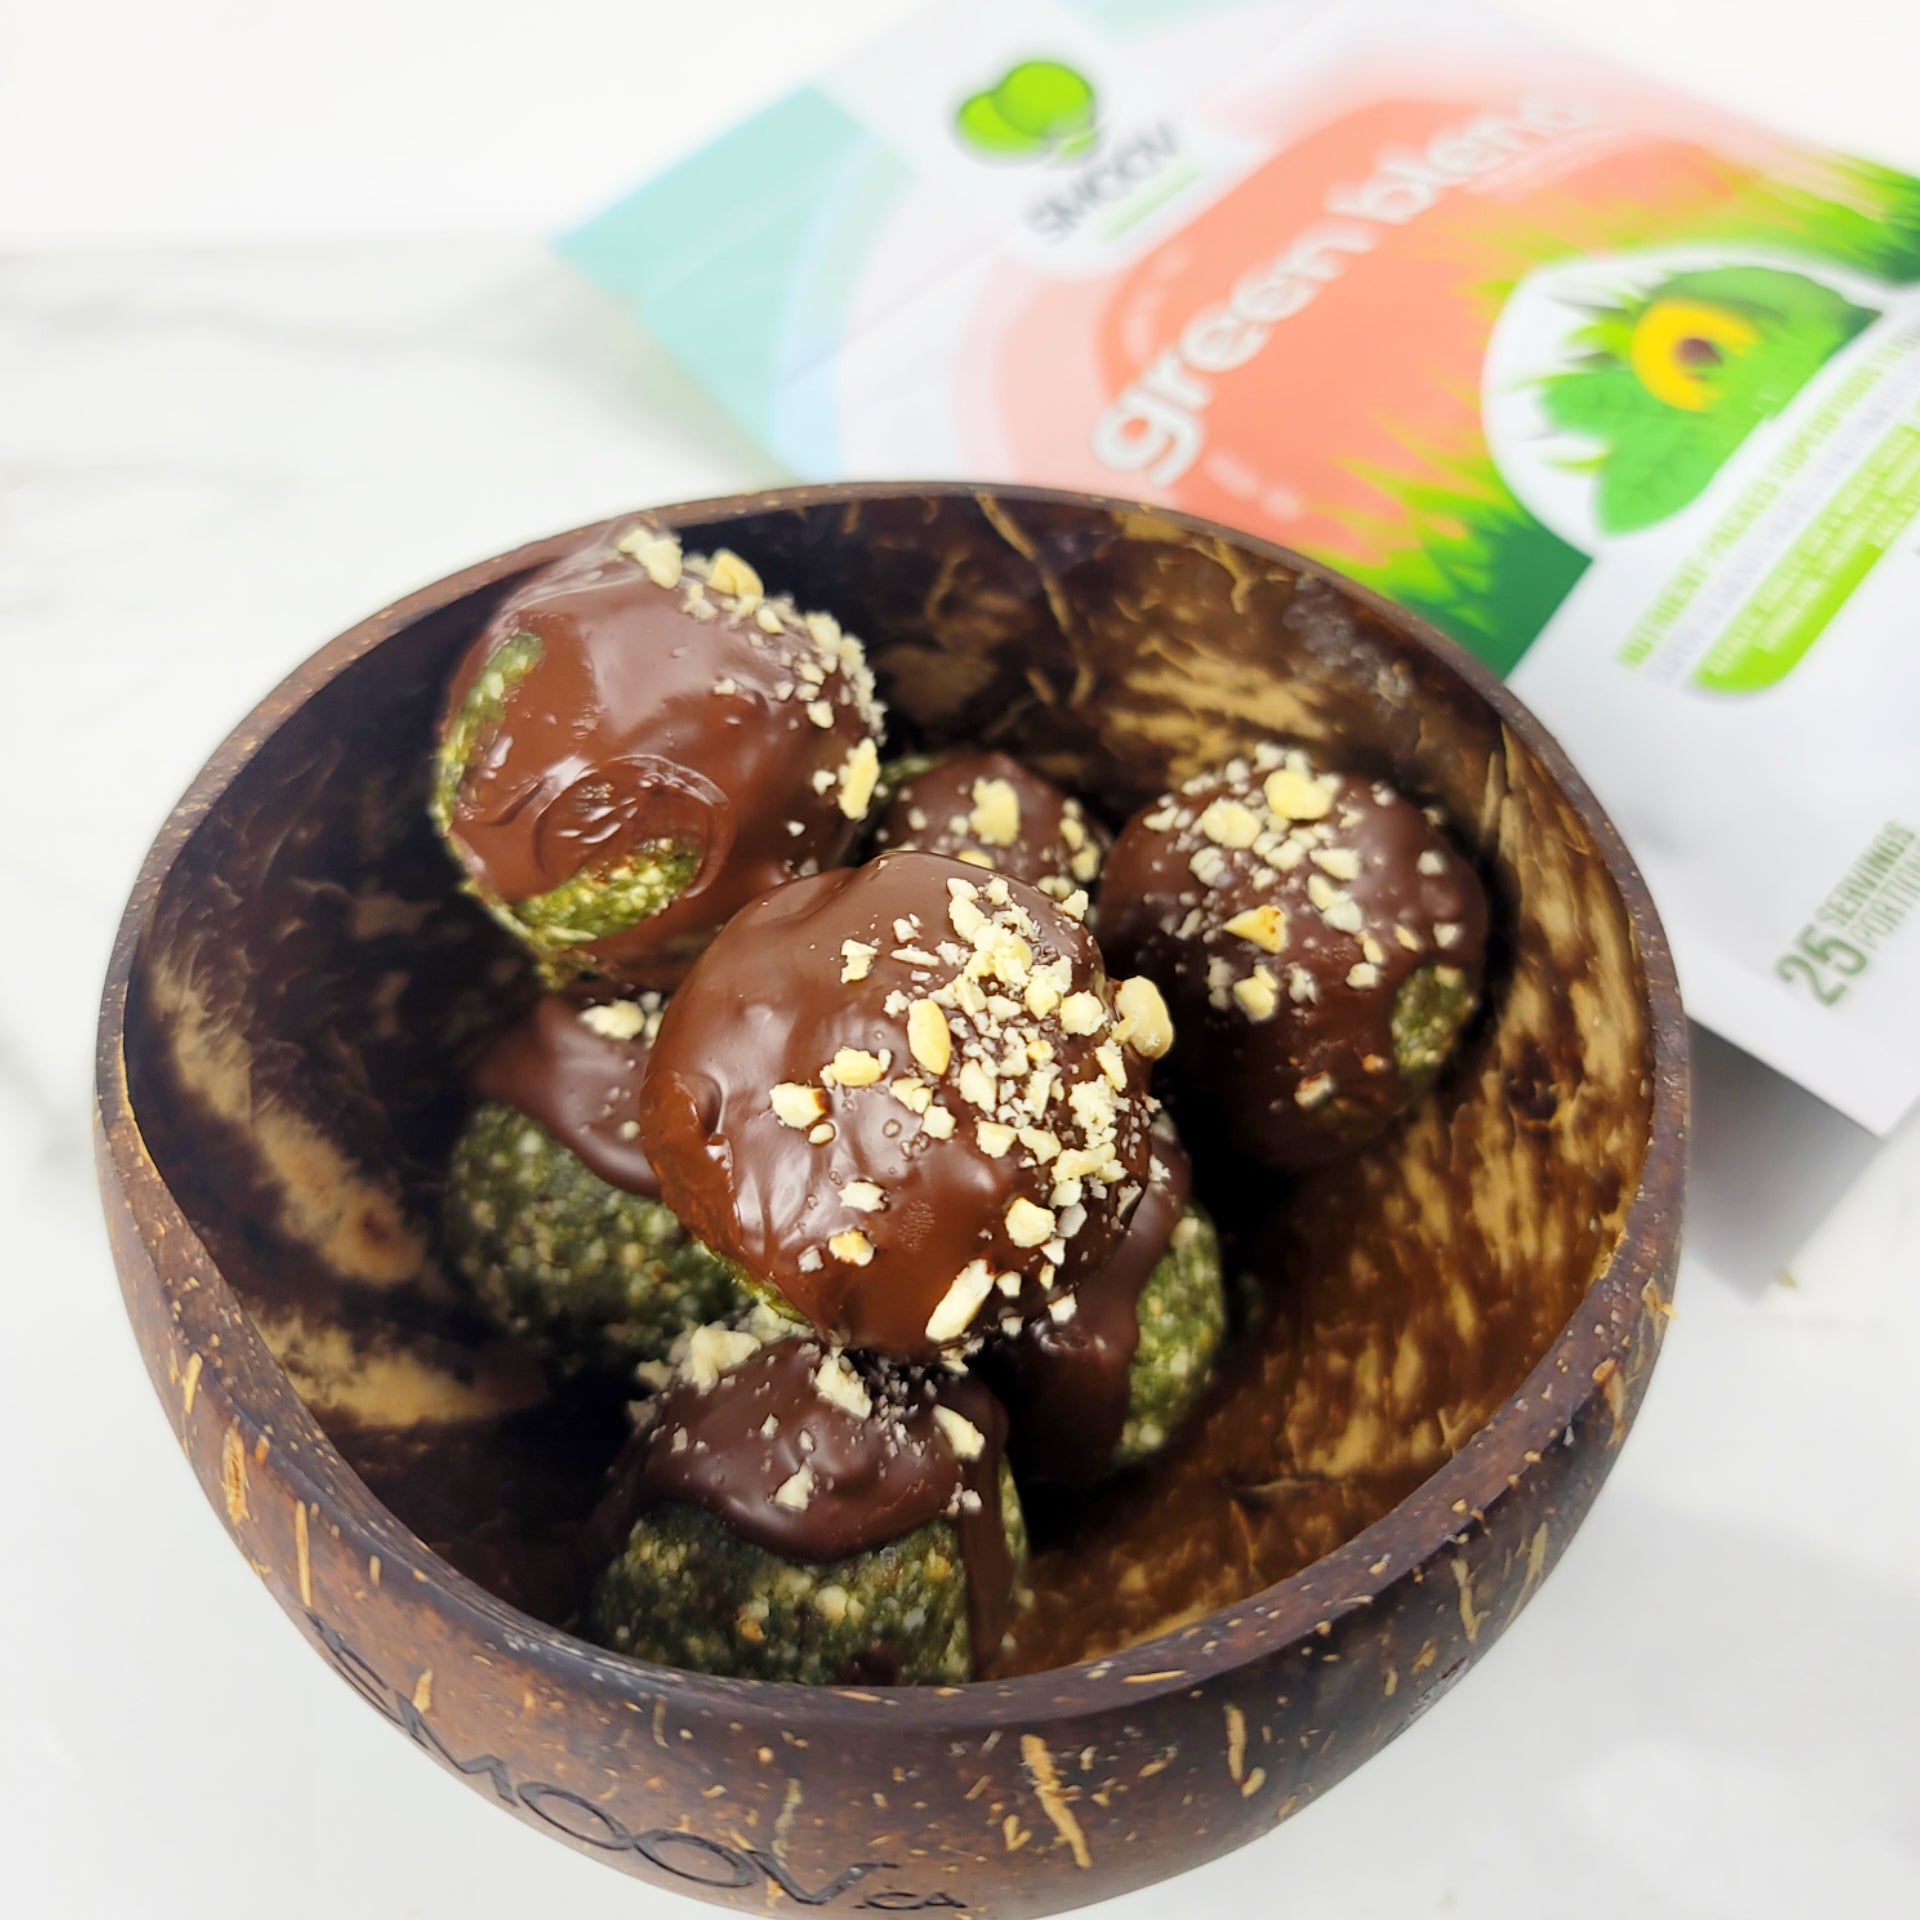 Green Truffle Bites made using smoov superfood blends and powders. Packed with antioxidants for health & wellness. Keto Friendly